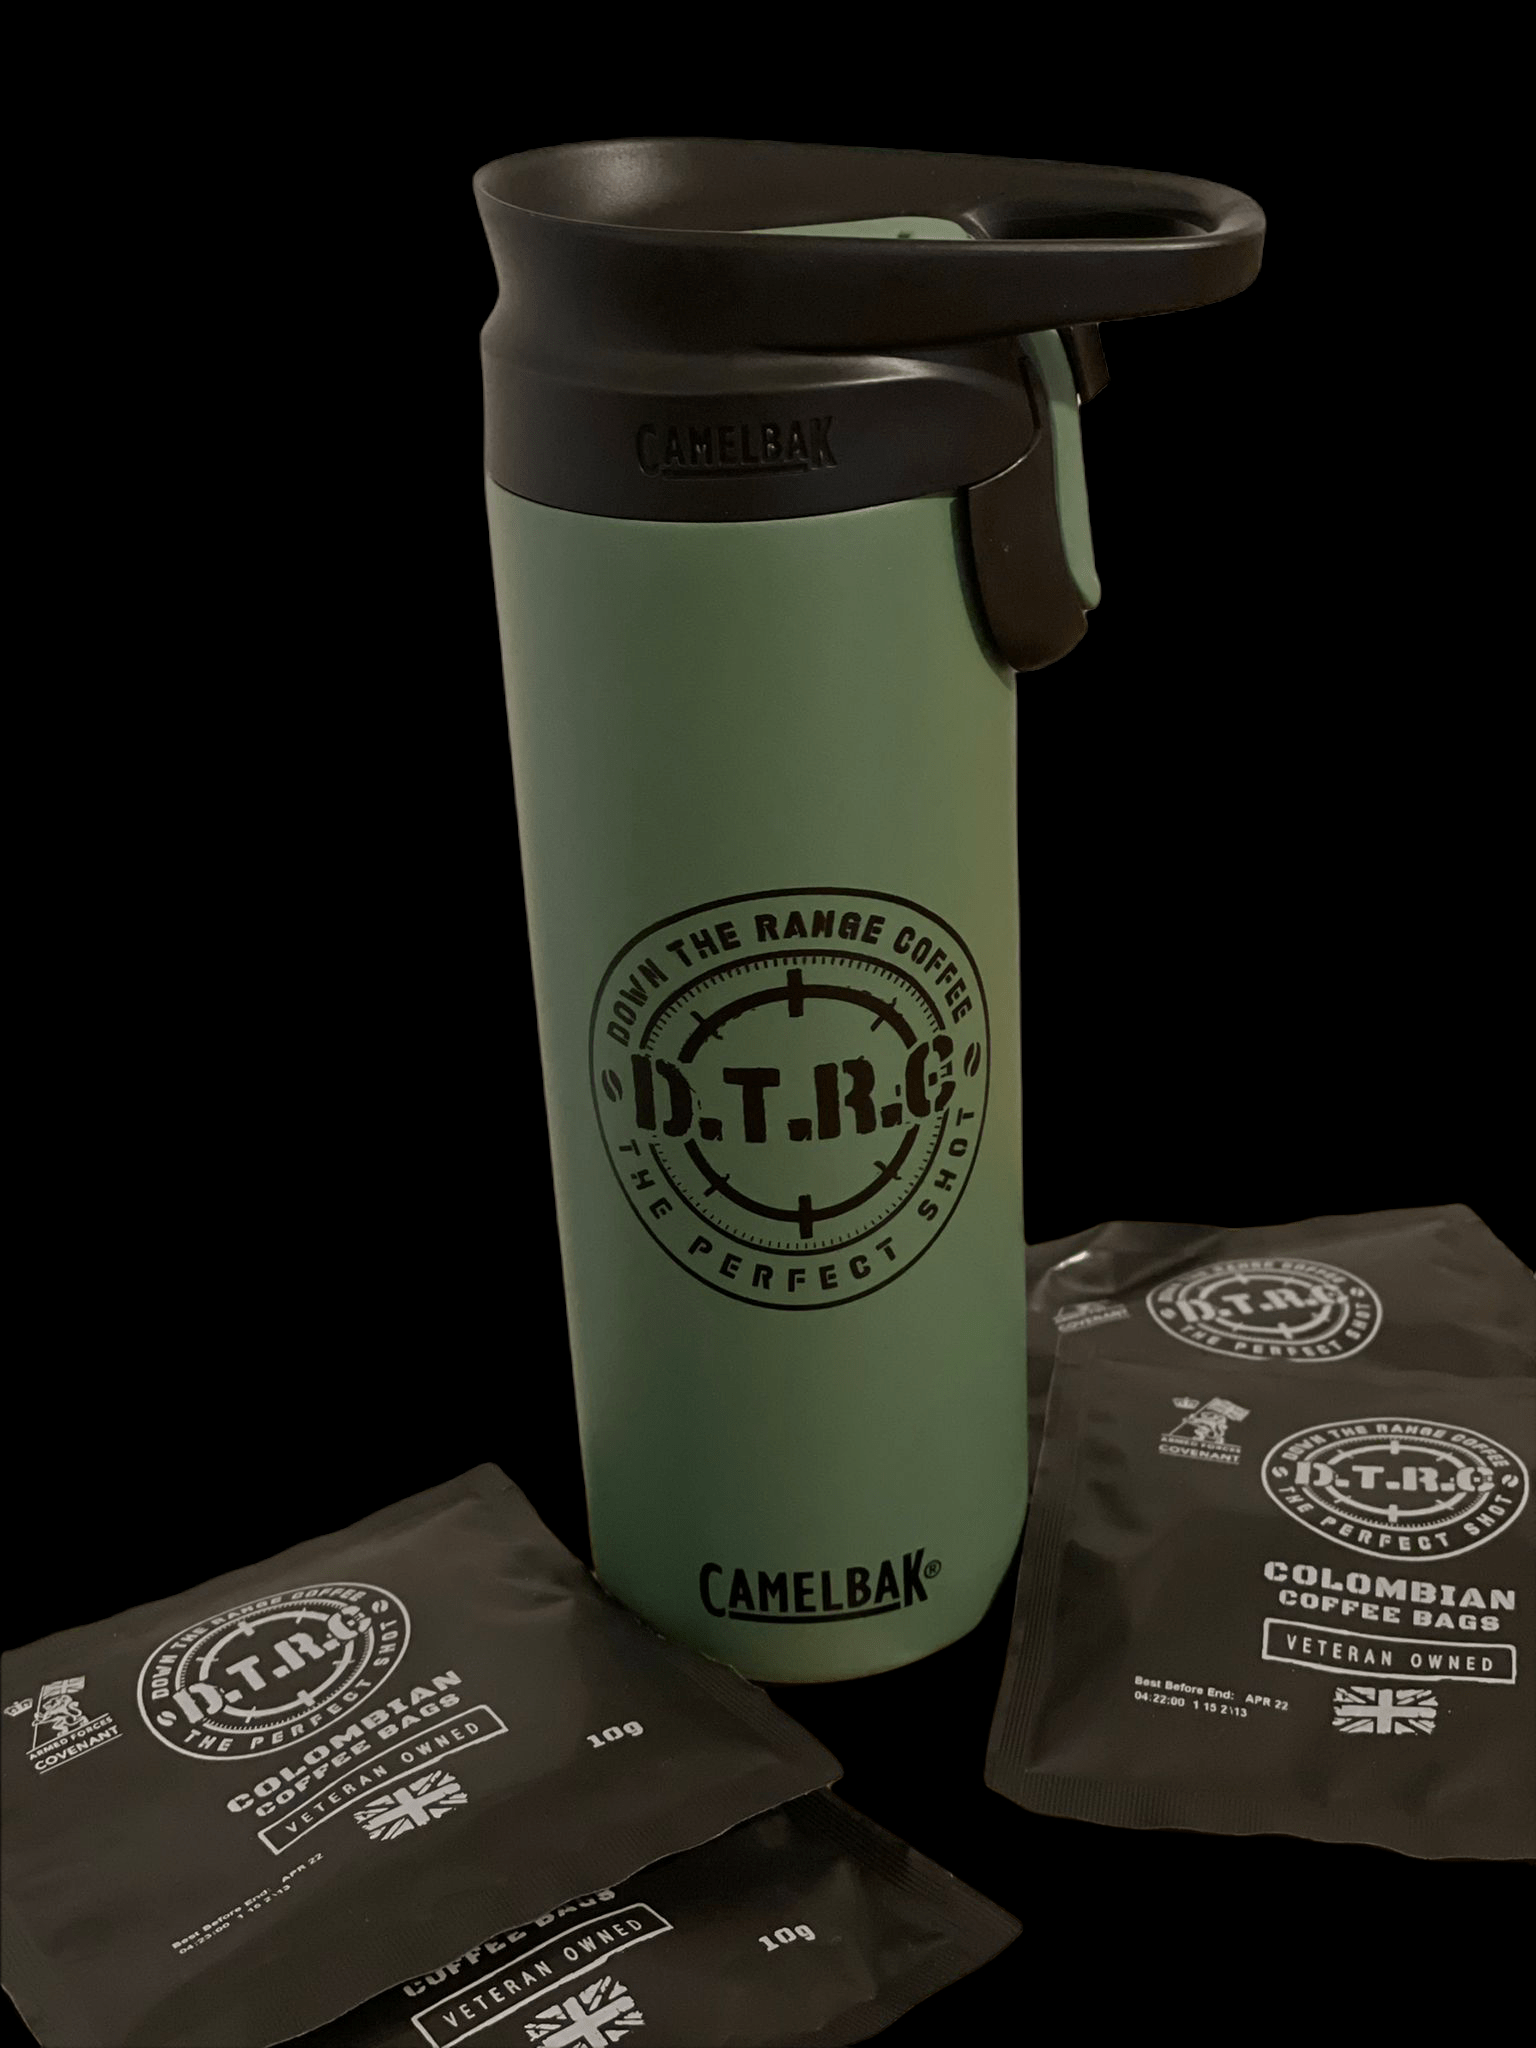 Down The Range Coffee Equipment CamelBak 0.5L Forge Flask Olive Green